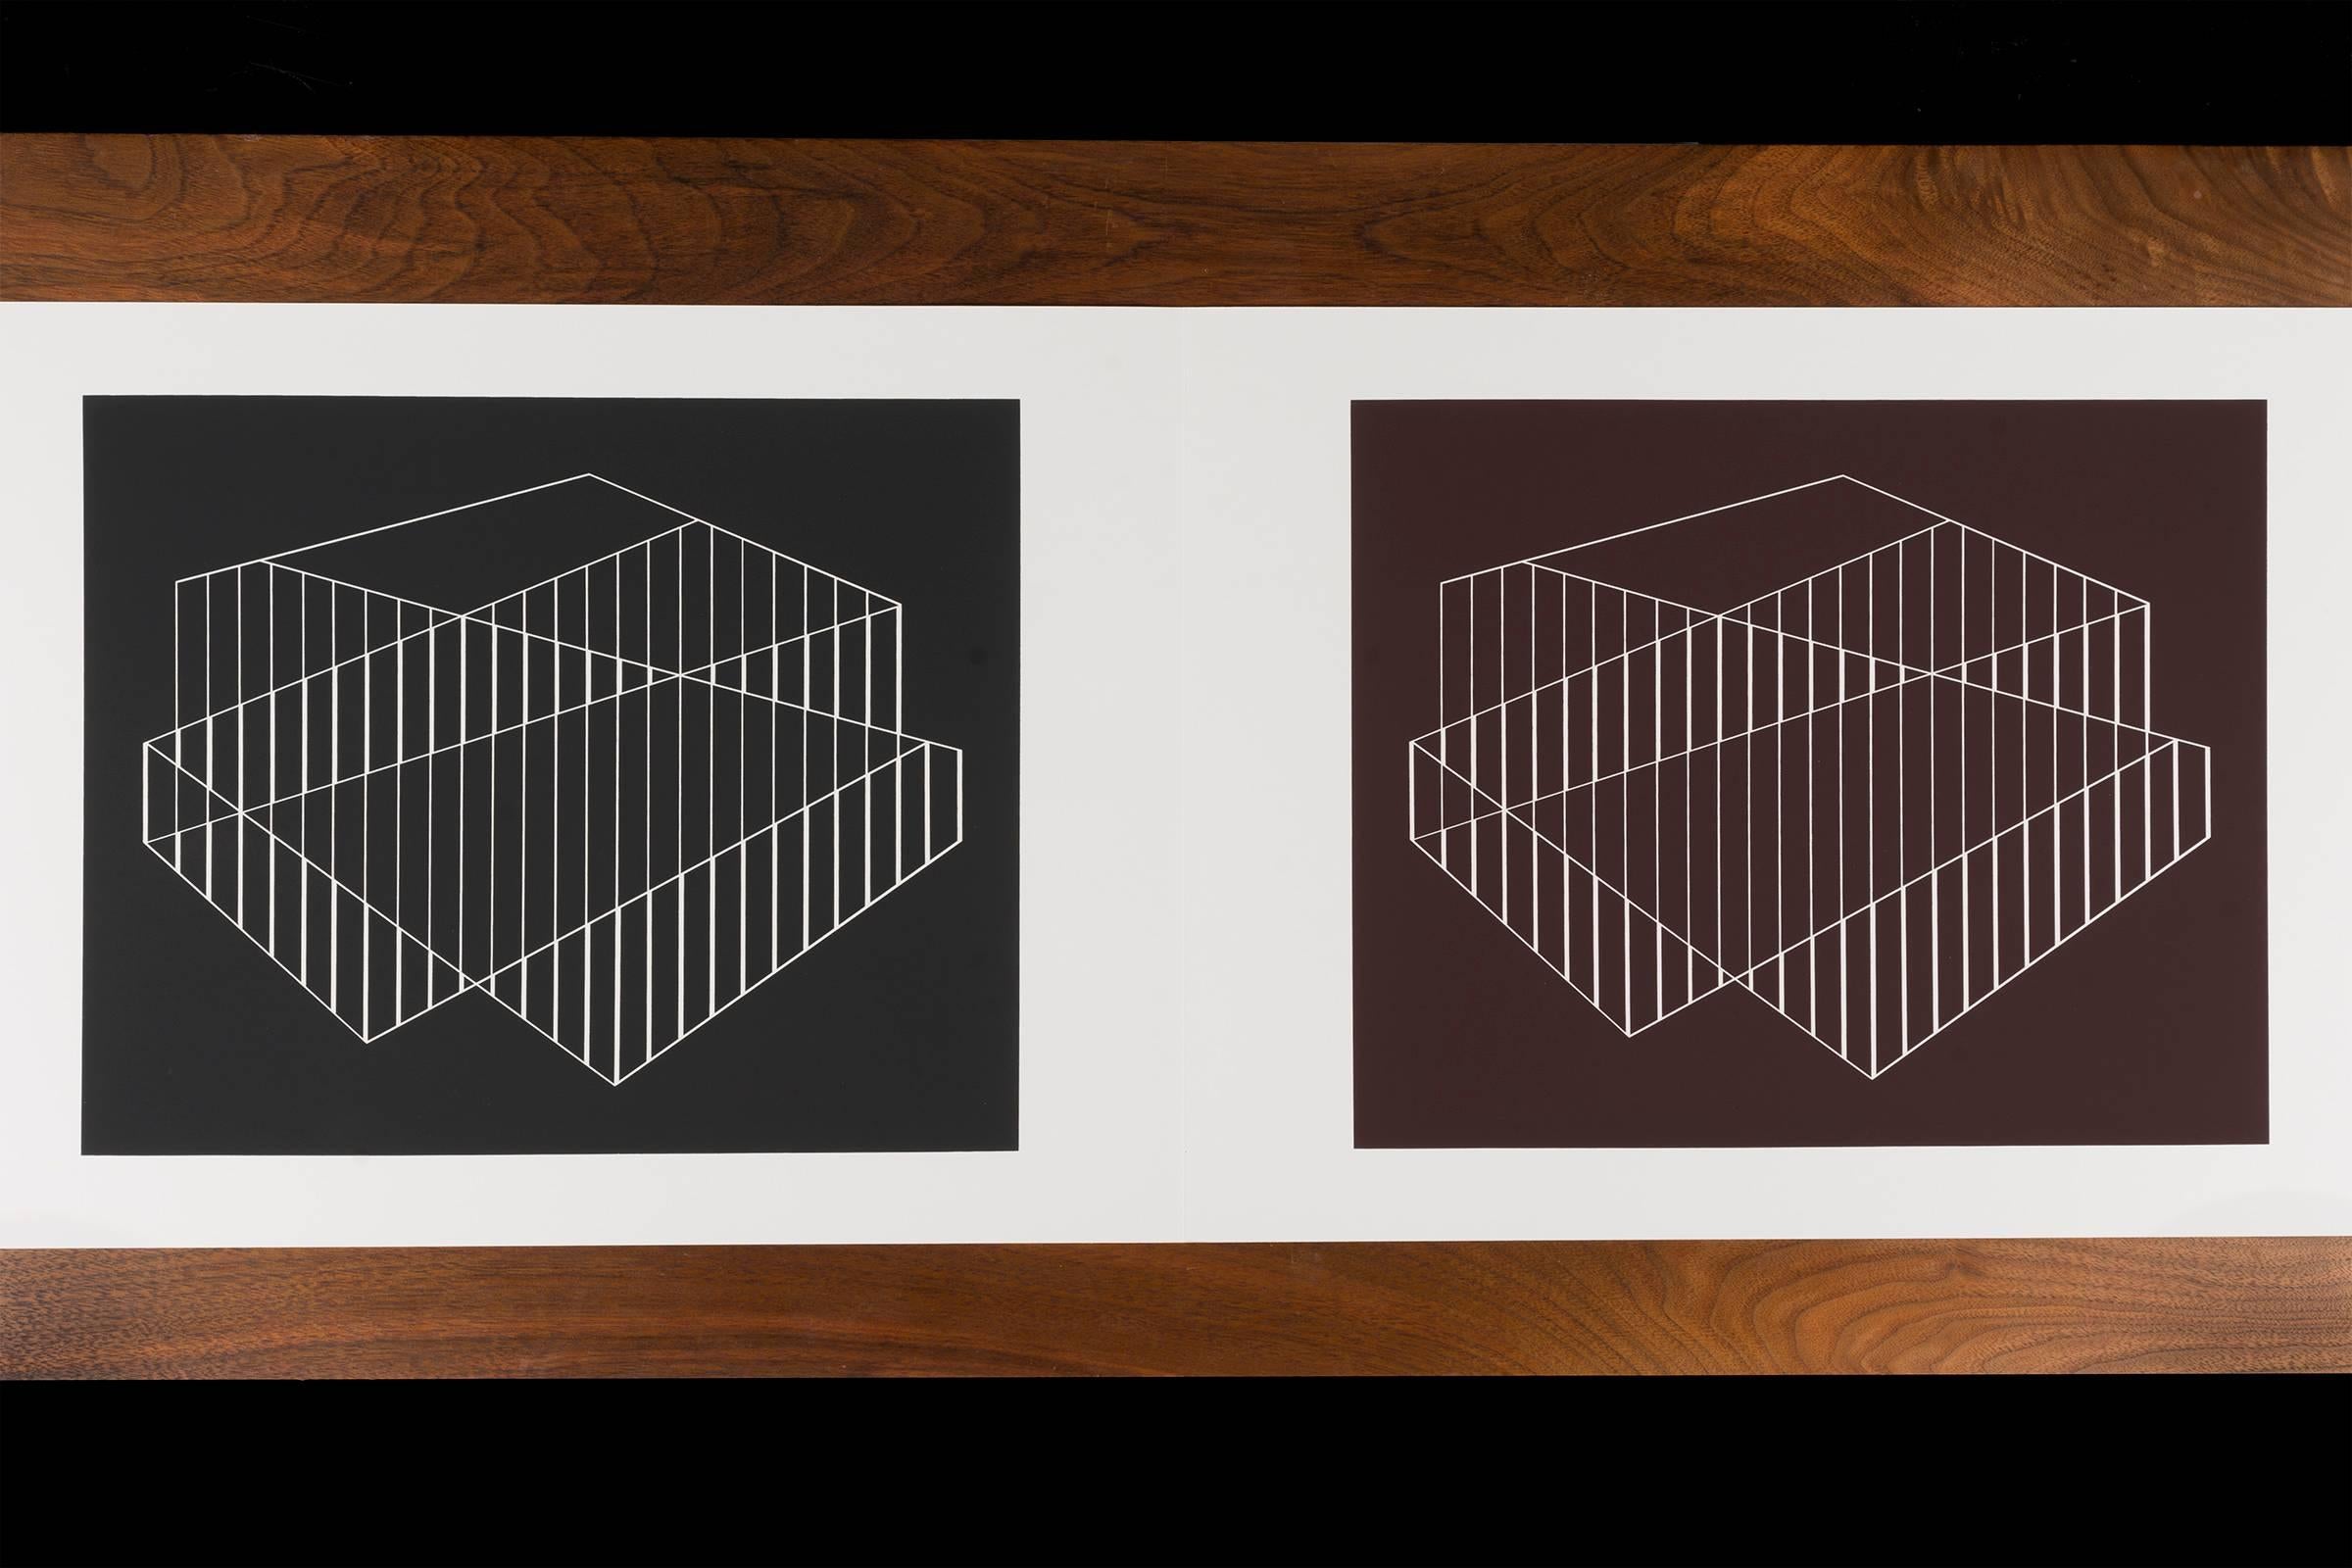 Josef Albers Formulations - Articulations I & II
Edition 974/ 1000
1972 screen-print on paper
Embossed with Josef Albers initials, portfolio and folder number. This work is published by Harry N. Abrams and Ives-Sillman.
This work has never been